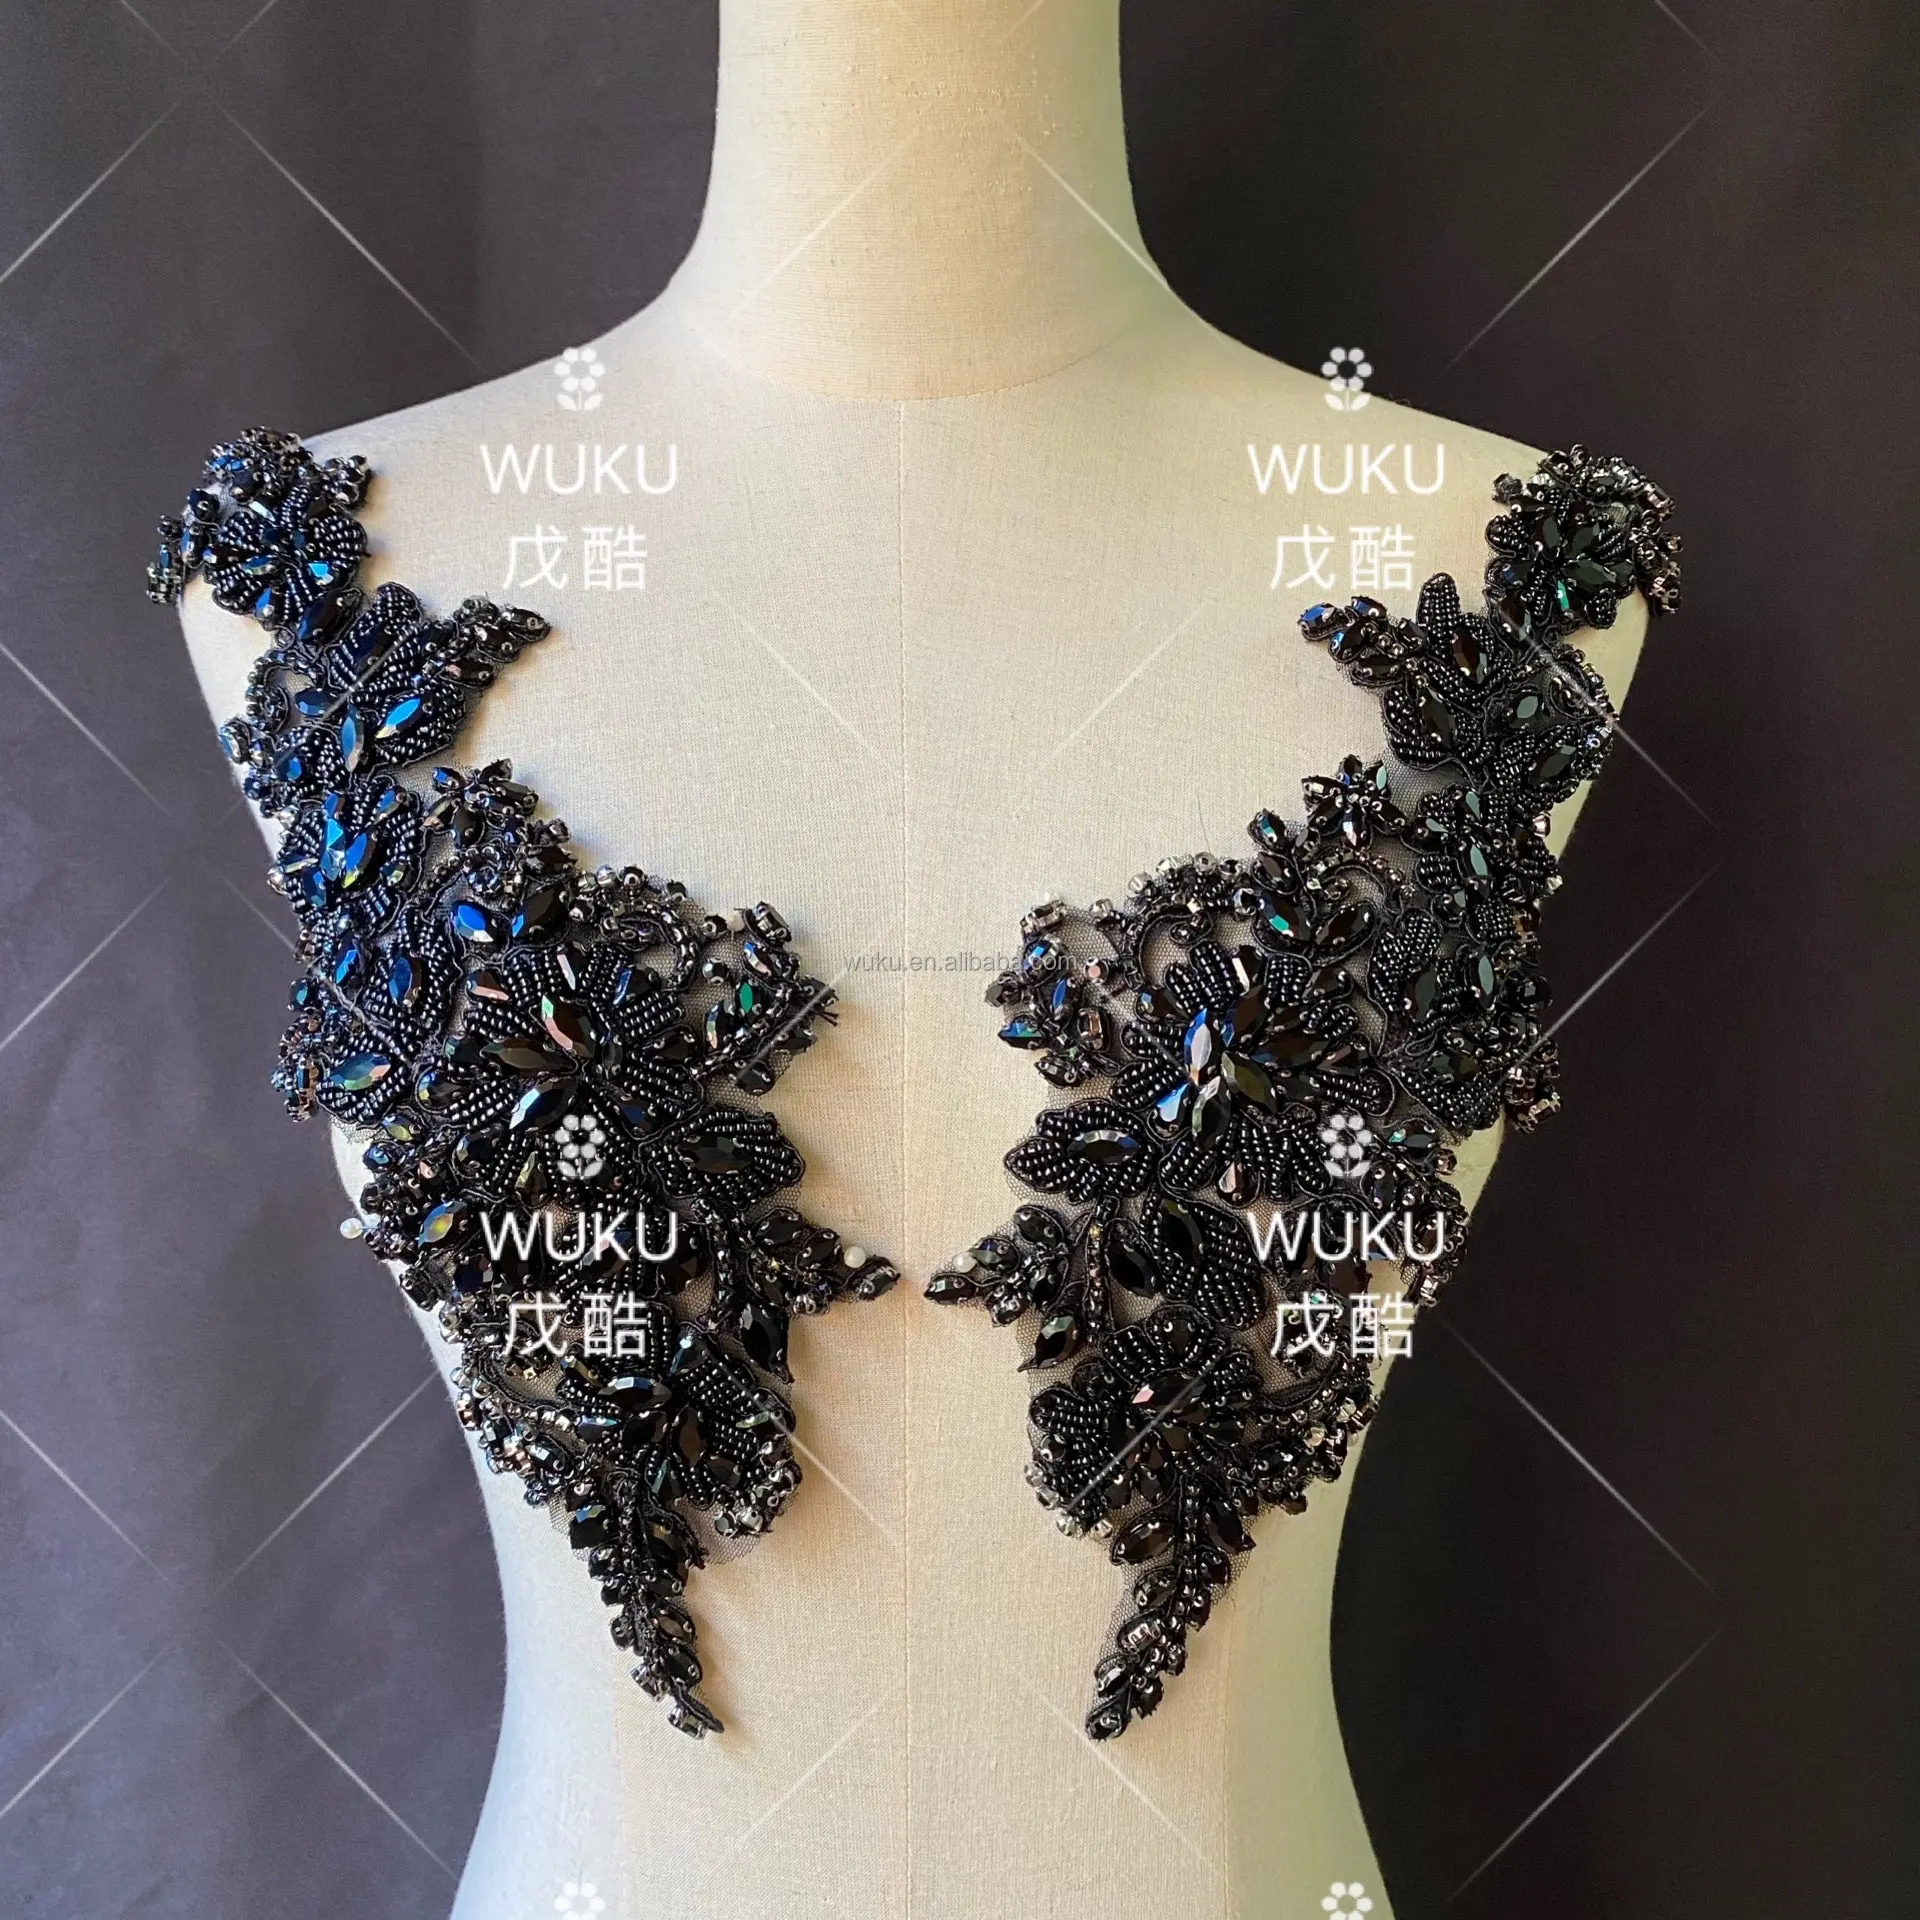 wuku 2021 free DIY sew on lace in encrusted crystal beads applique in black